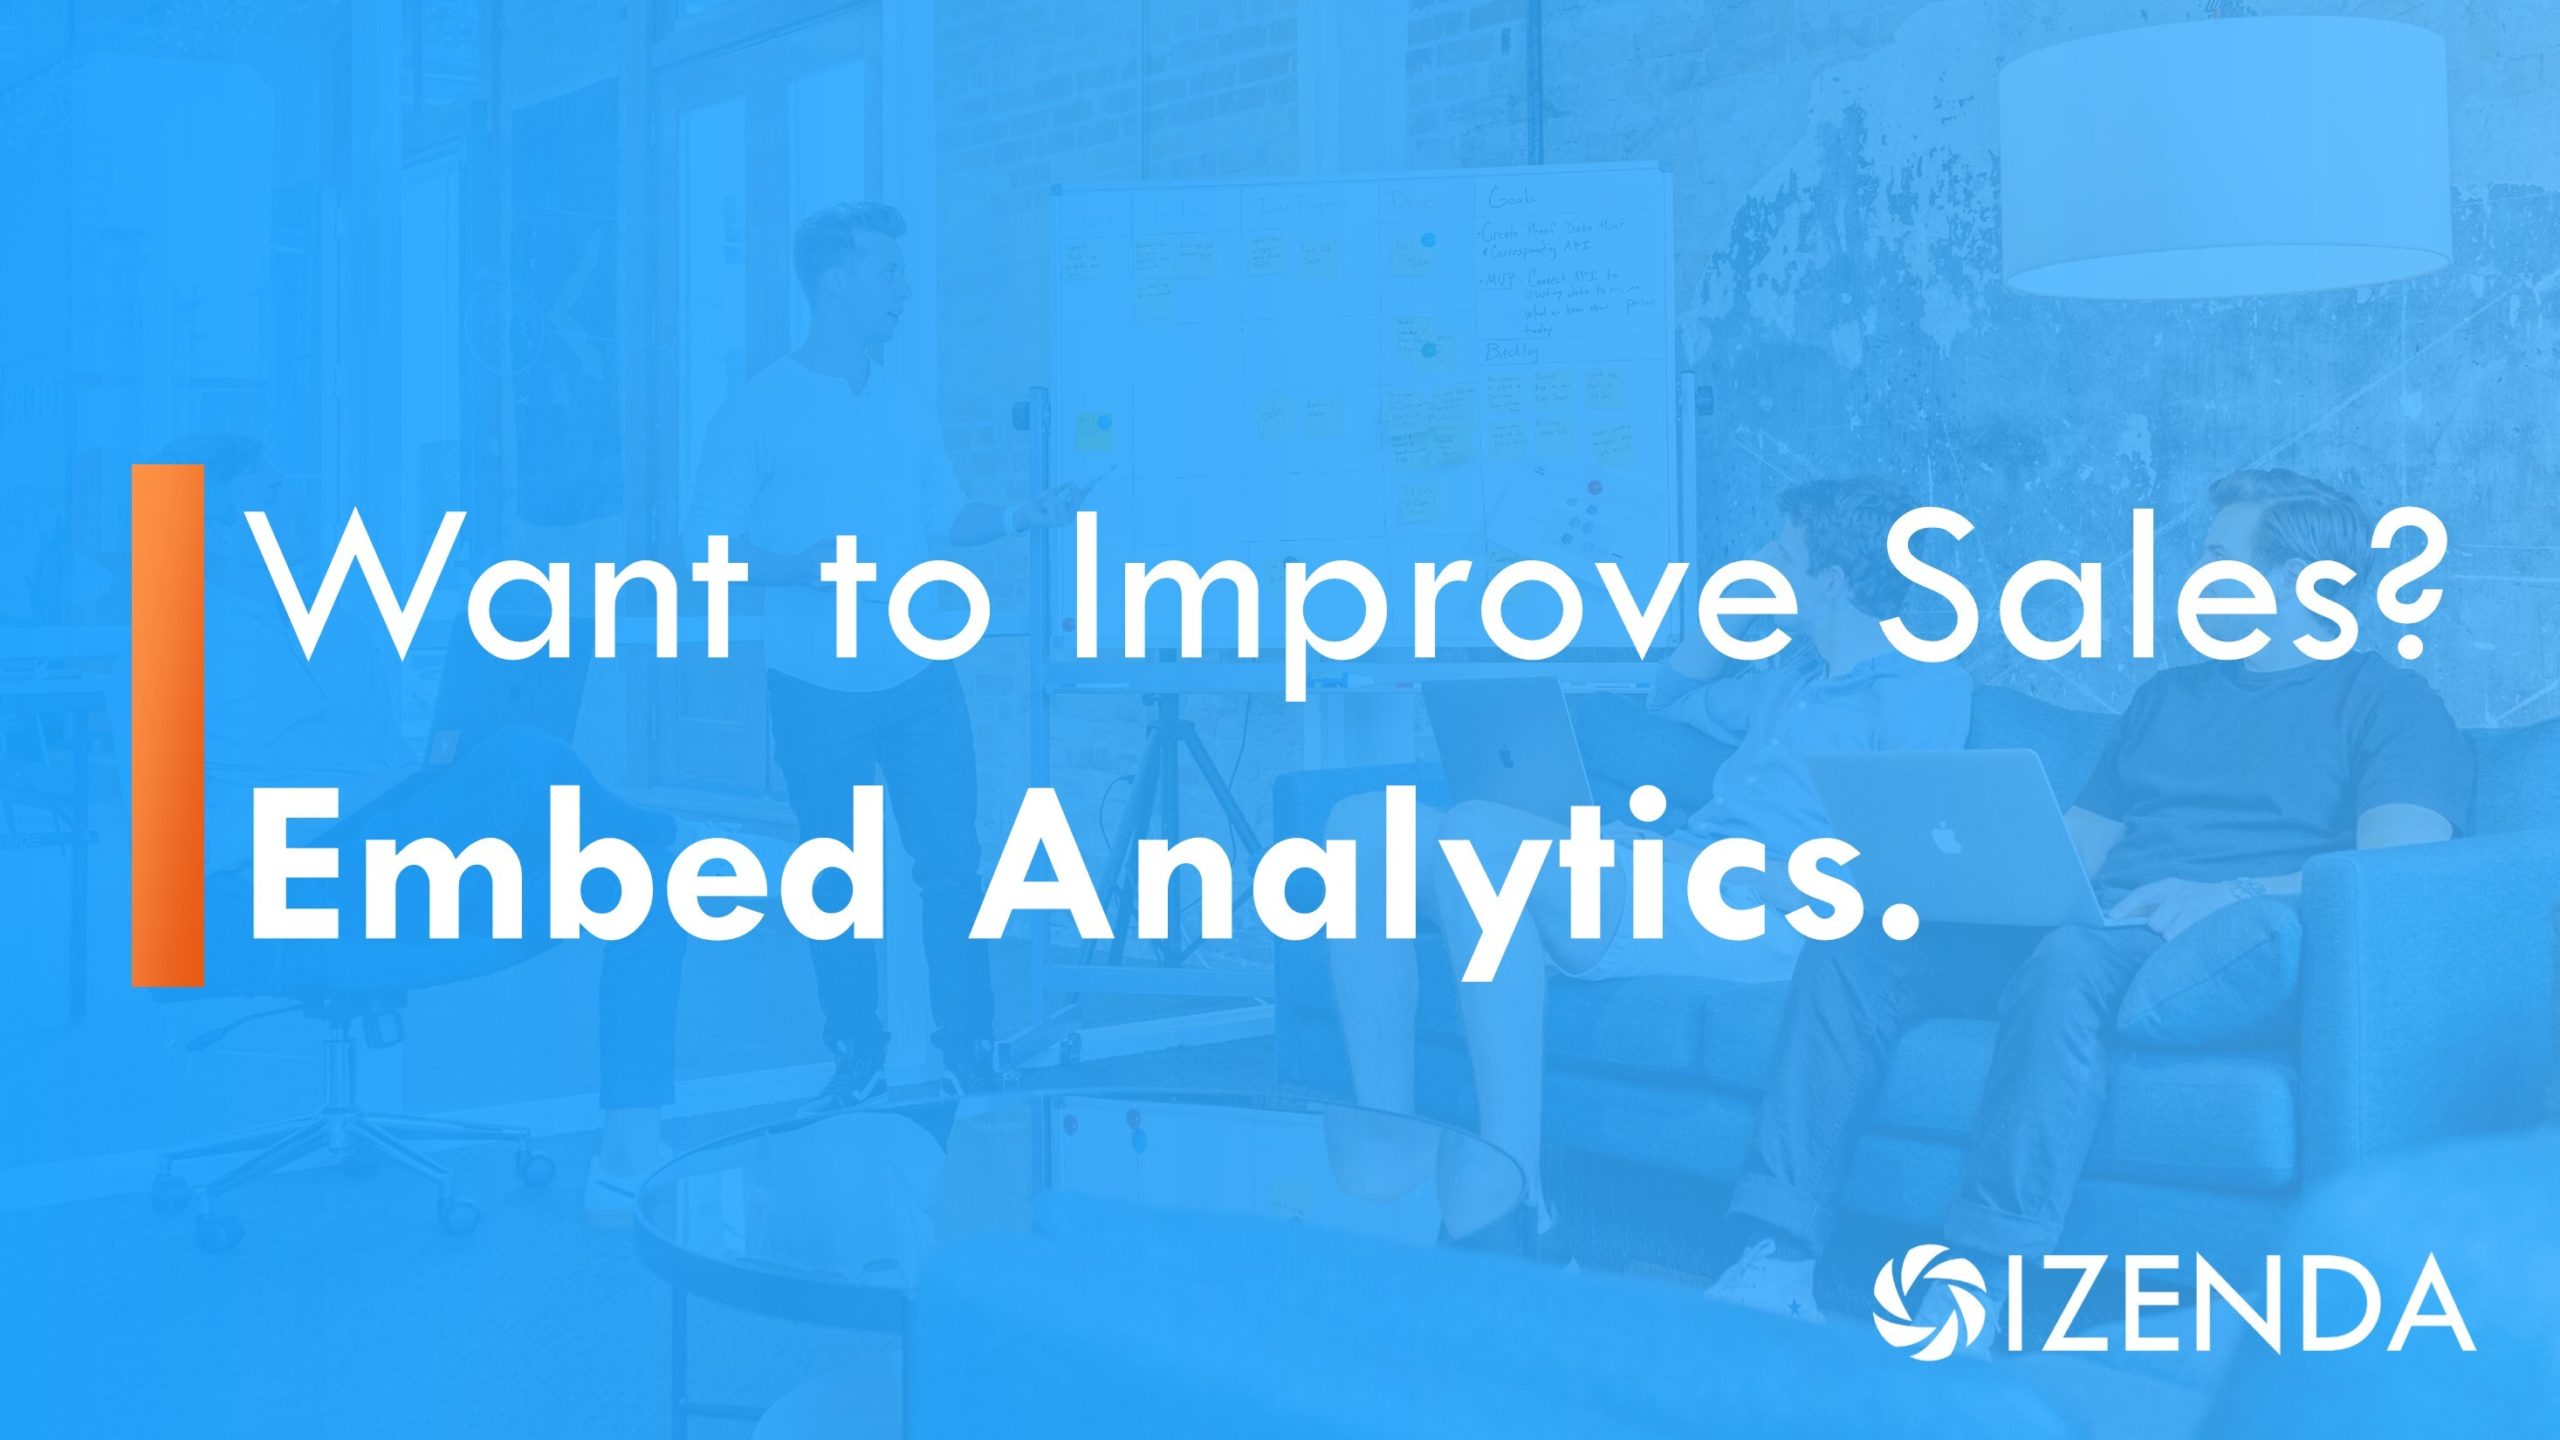 embedded analytics can improve application sales